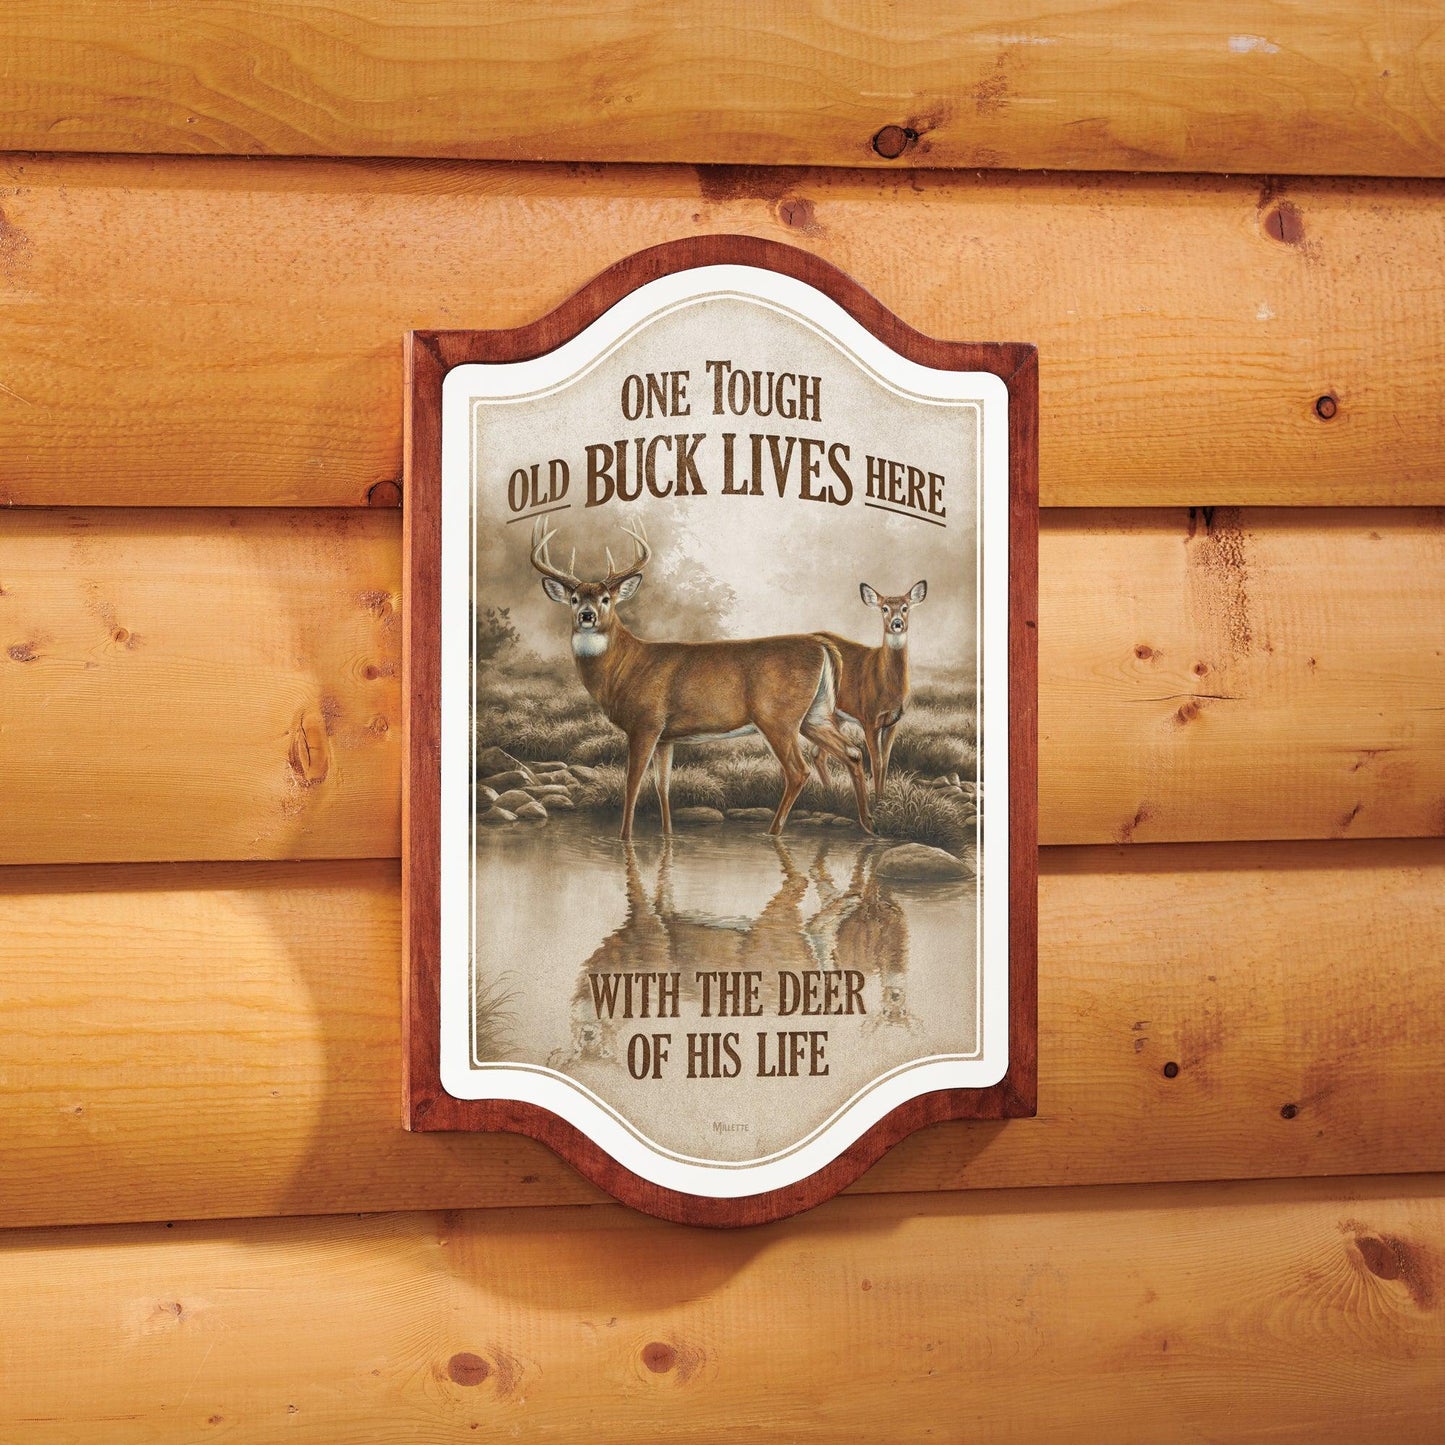 Tough Old Buck Lives Here Vintage Framed Tin Sign - Wild Wings